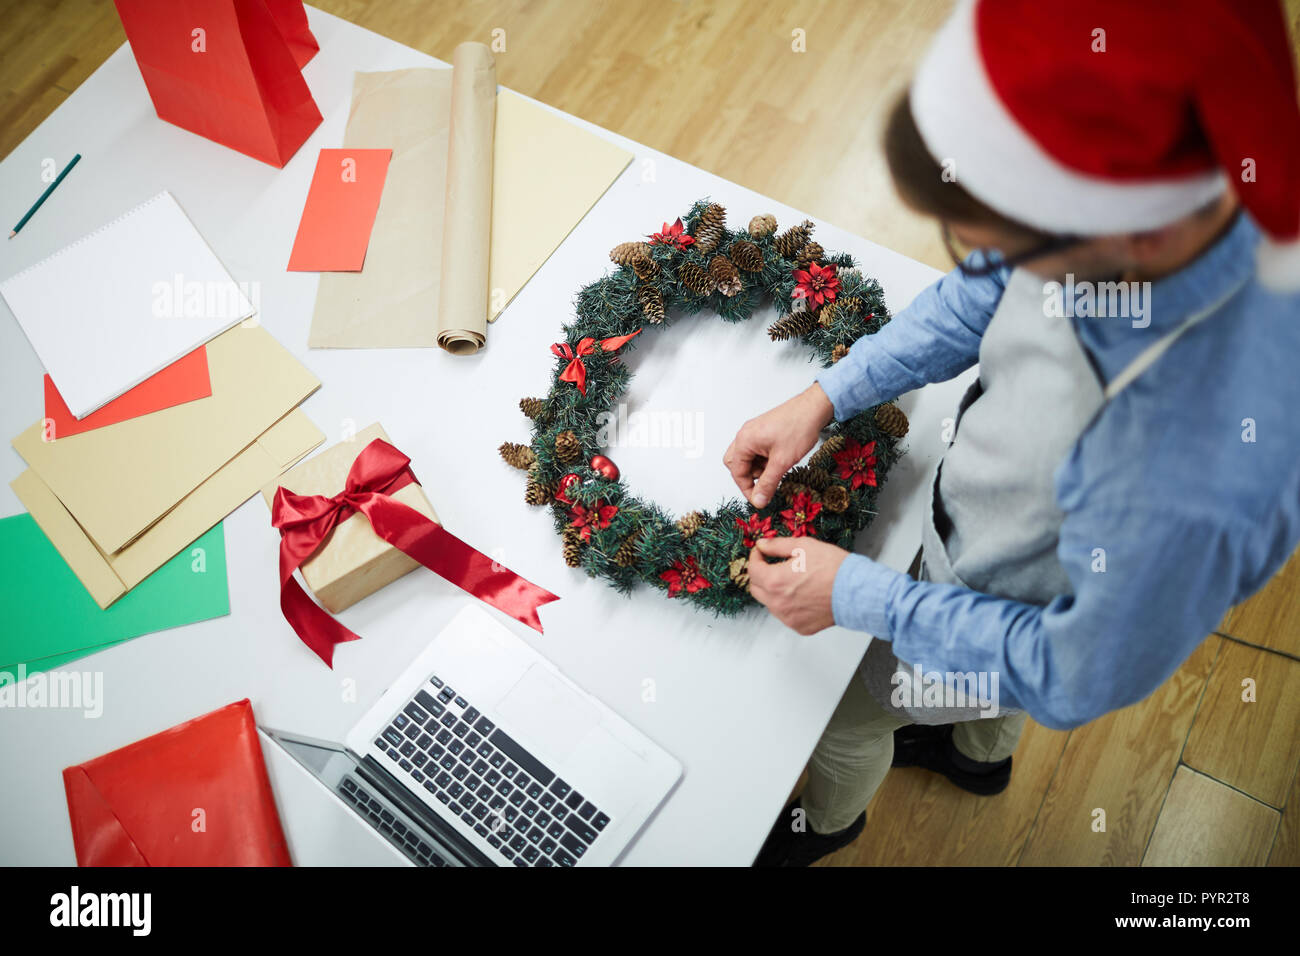 Busy man working on Christmas decoration Stock Photo